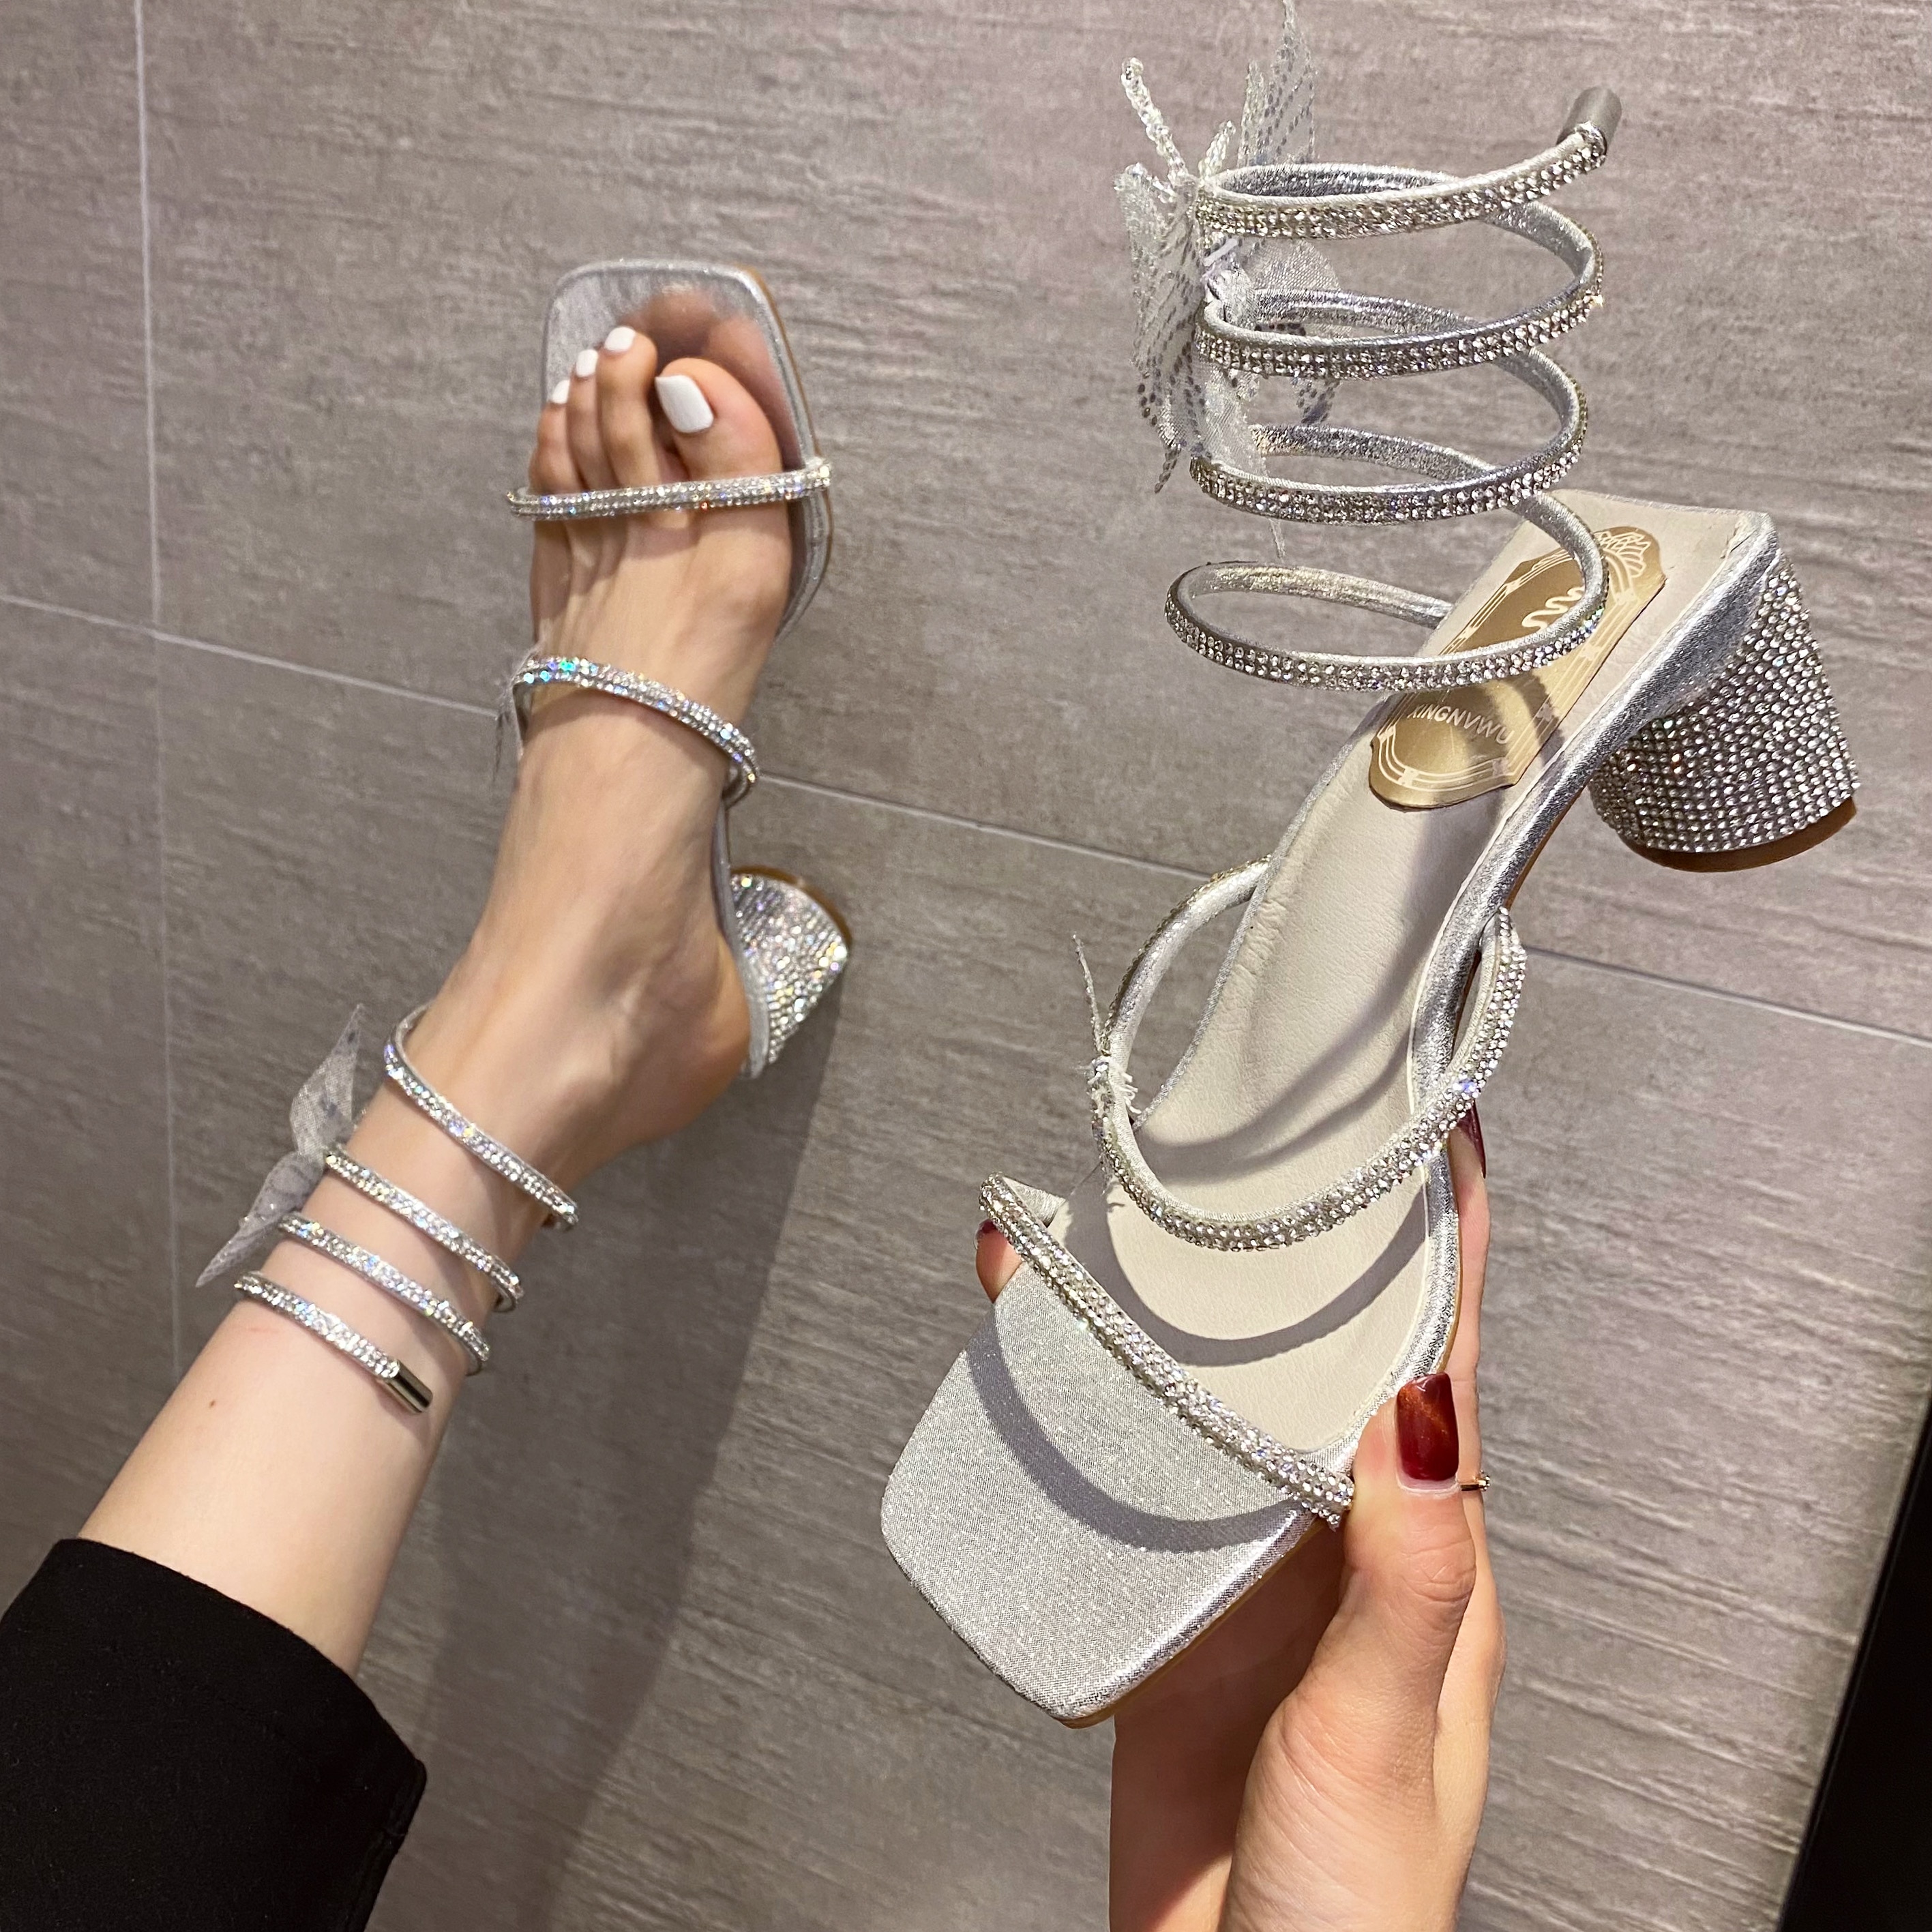 2021 Summer Women Sandals Fashion Luxury Rhinestone Snake-shaped Winding Butterfly Thick Heel High Heel Sandals Party Shoes